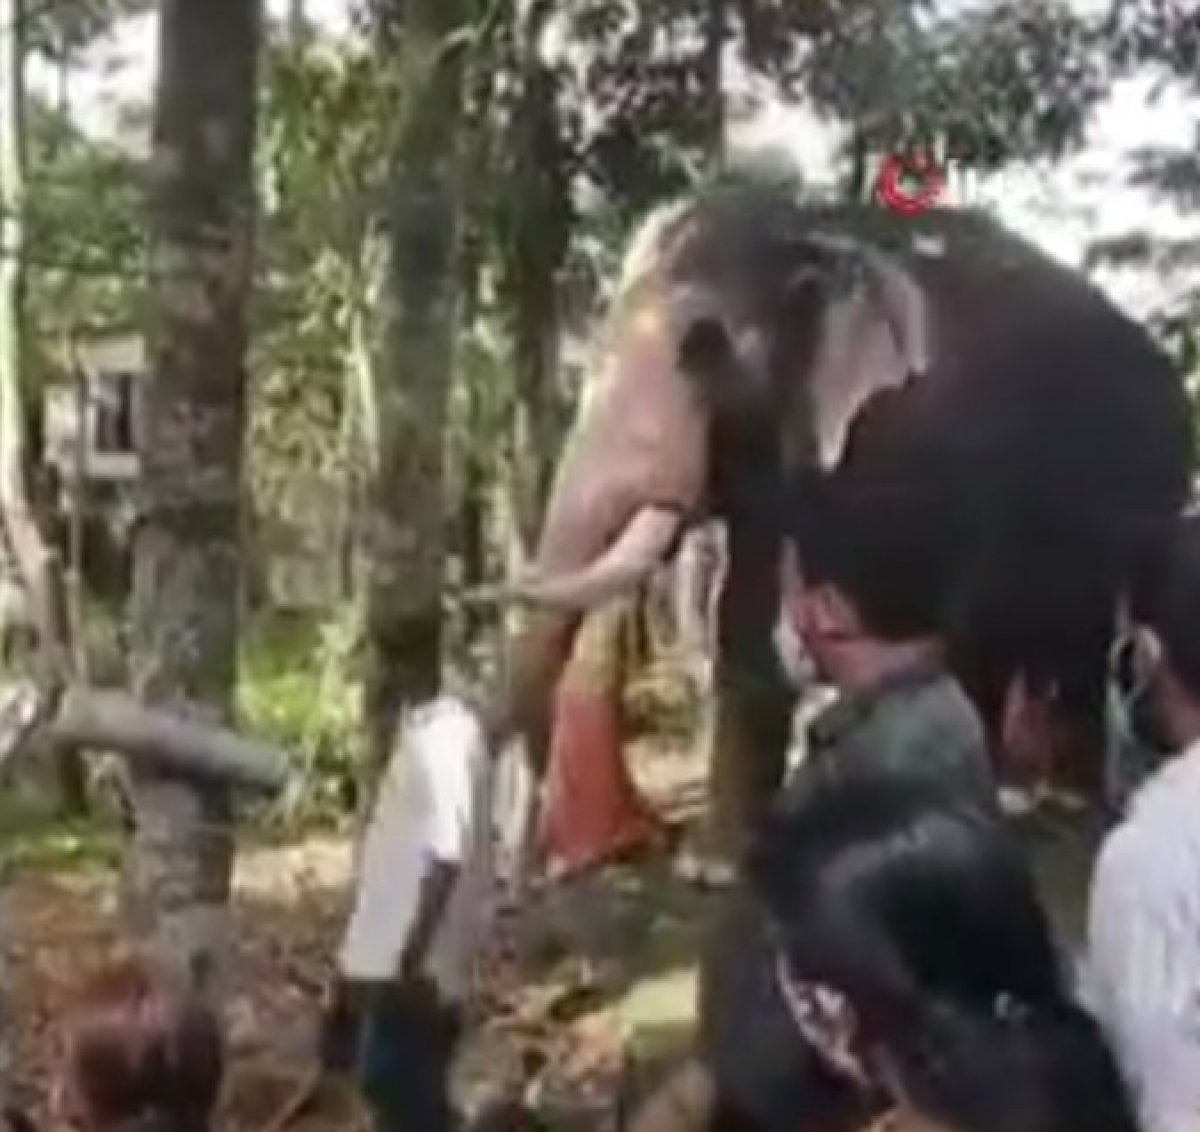 Elephant Saying Goodbye to Its Owner in India #1